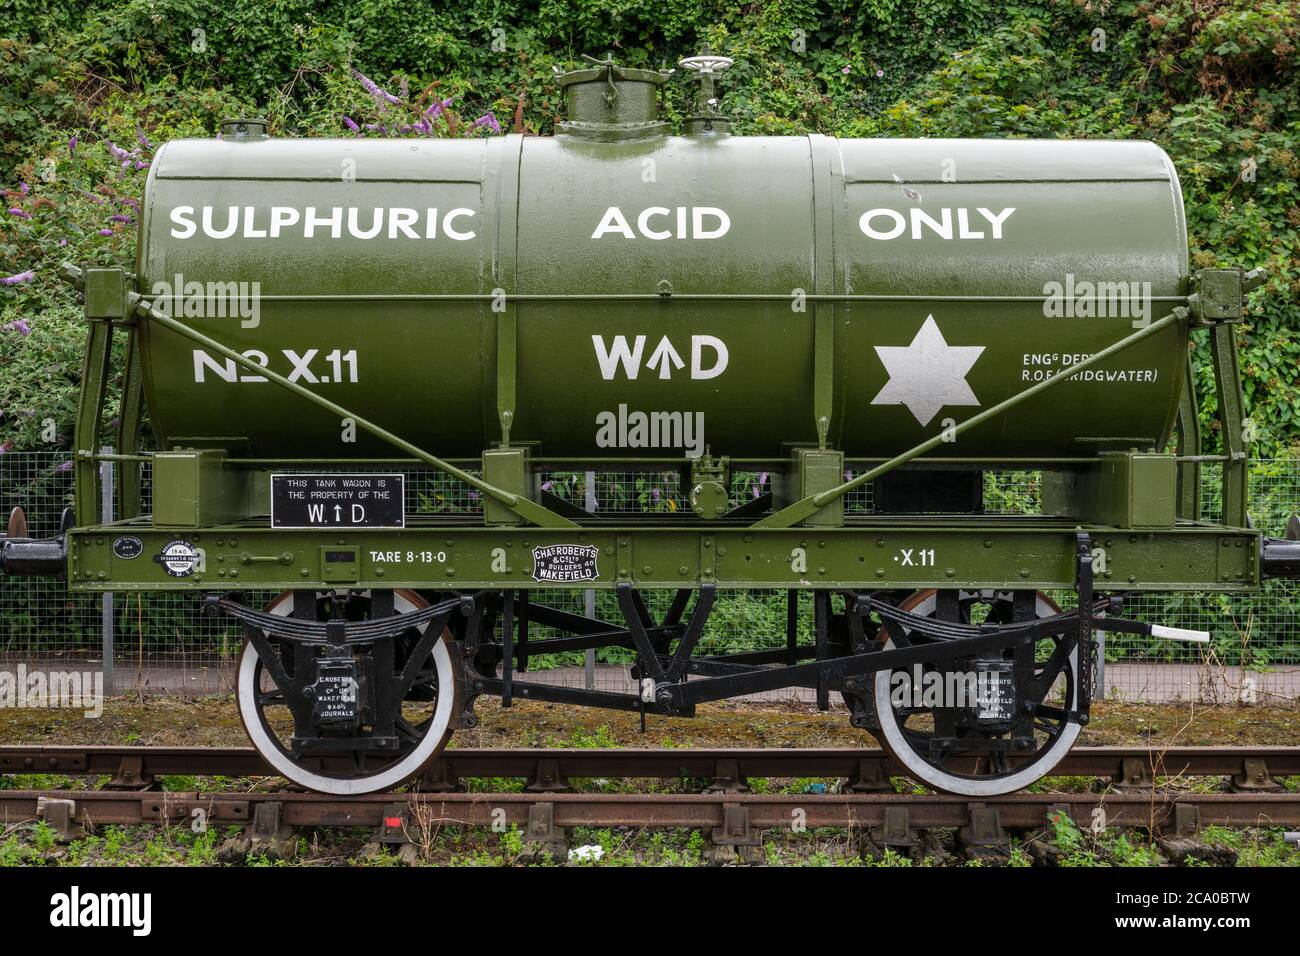 A preserved Sulphuric Acid Tank Wagon on display at the Docks in Bristol, England. Stock Photo